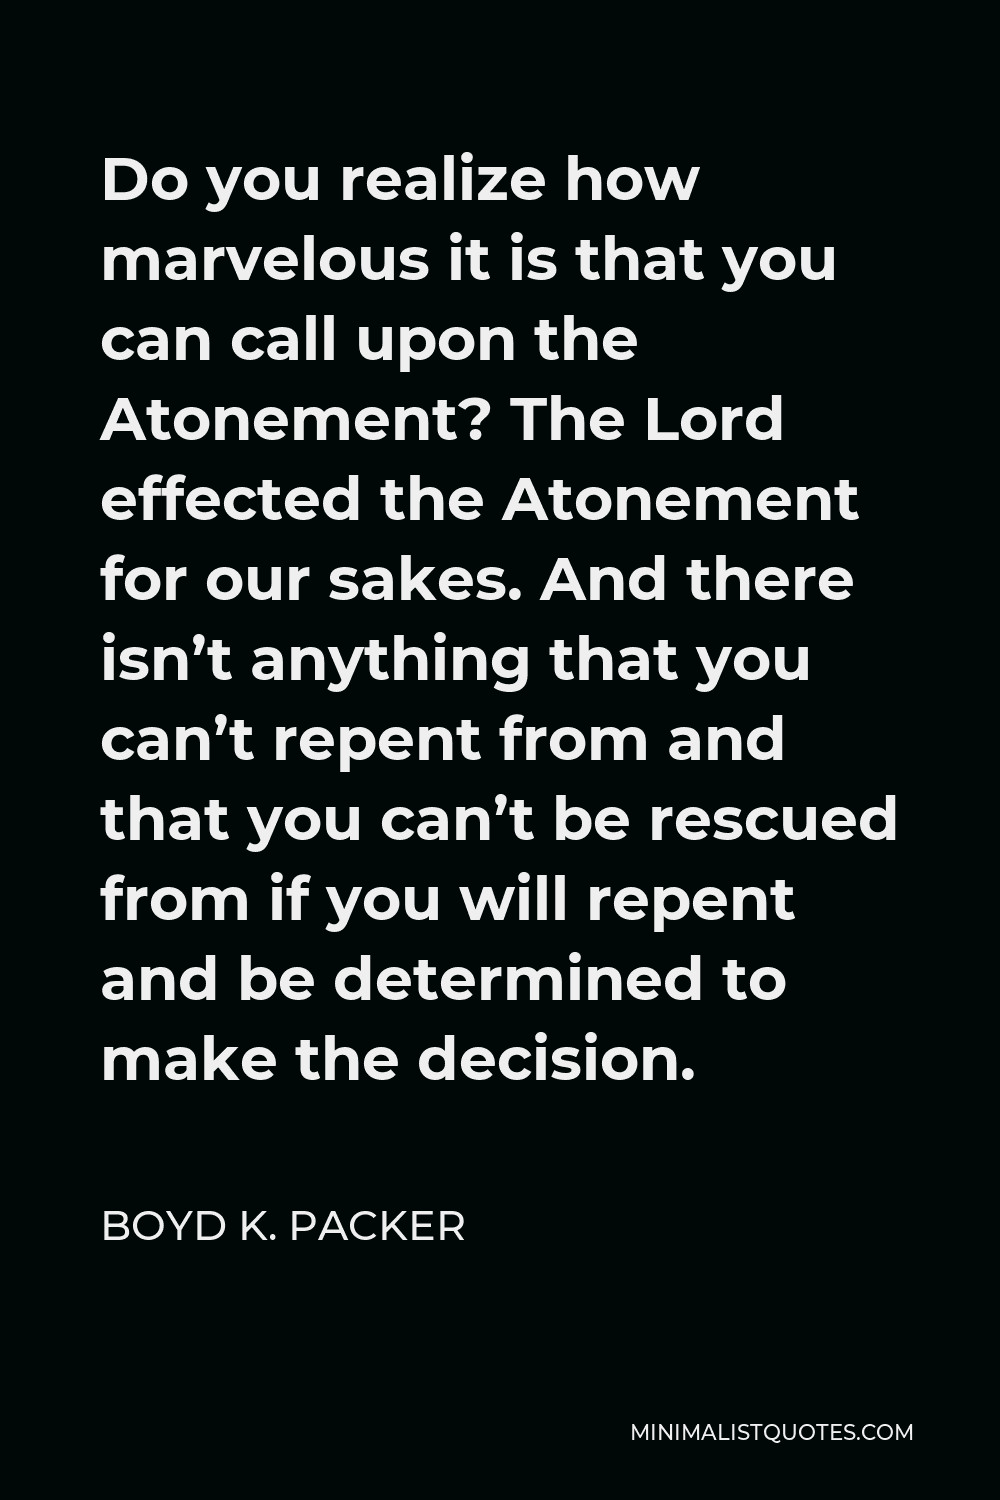 Boyd K. Packer Quote - Do you realize how marvelous it is that you can call upon the Atonement? The Lord effected the Atonement for our sakes. And there isn’t anything that you can’t repent from and that you can’t be rescued from if you will repent and be determined to make the decision.